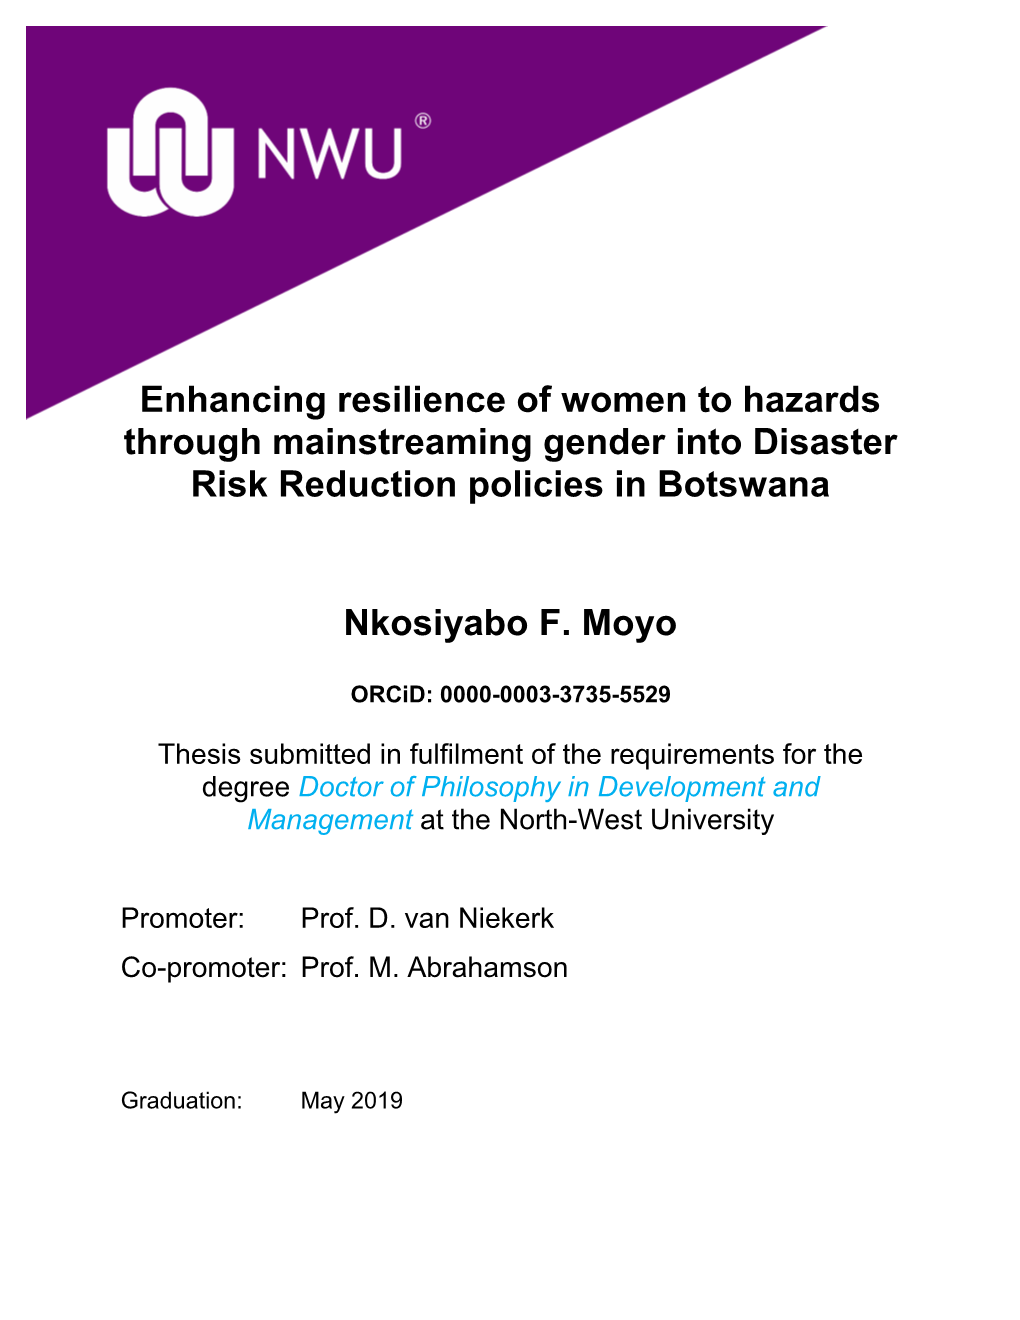 Enhancing Resilience of Women to Hazards Through Mainstreaming Gender Into Disaster Risk Reduction Policies in Botswana